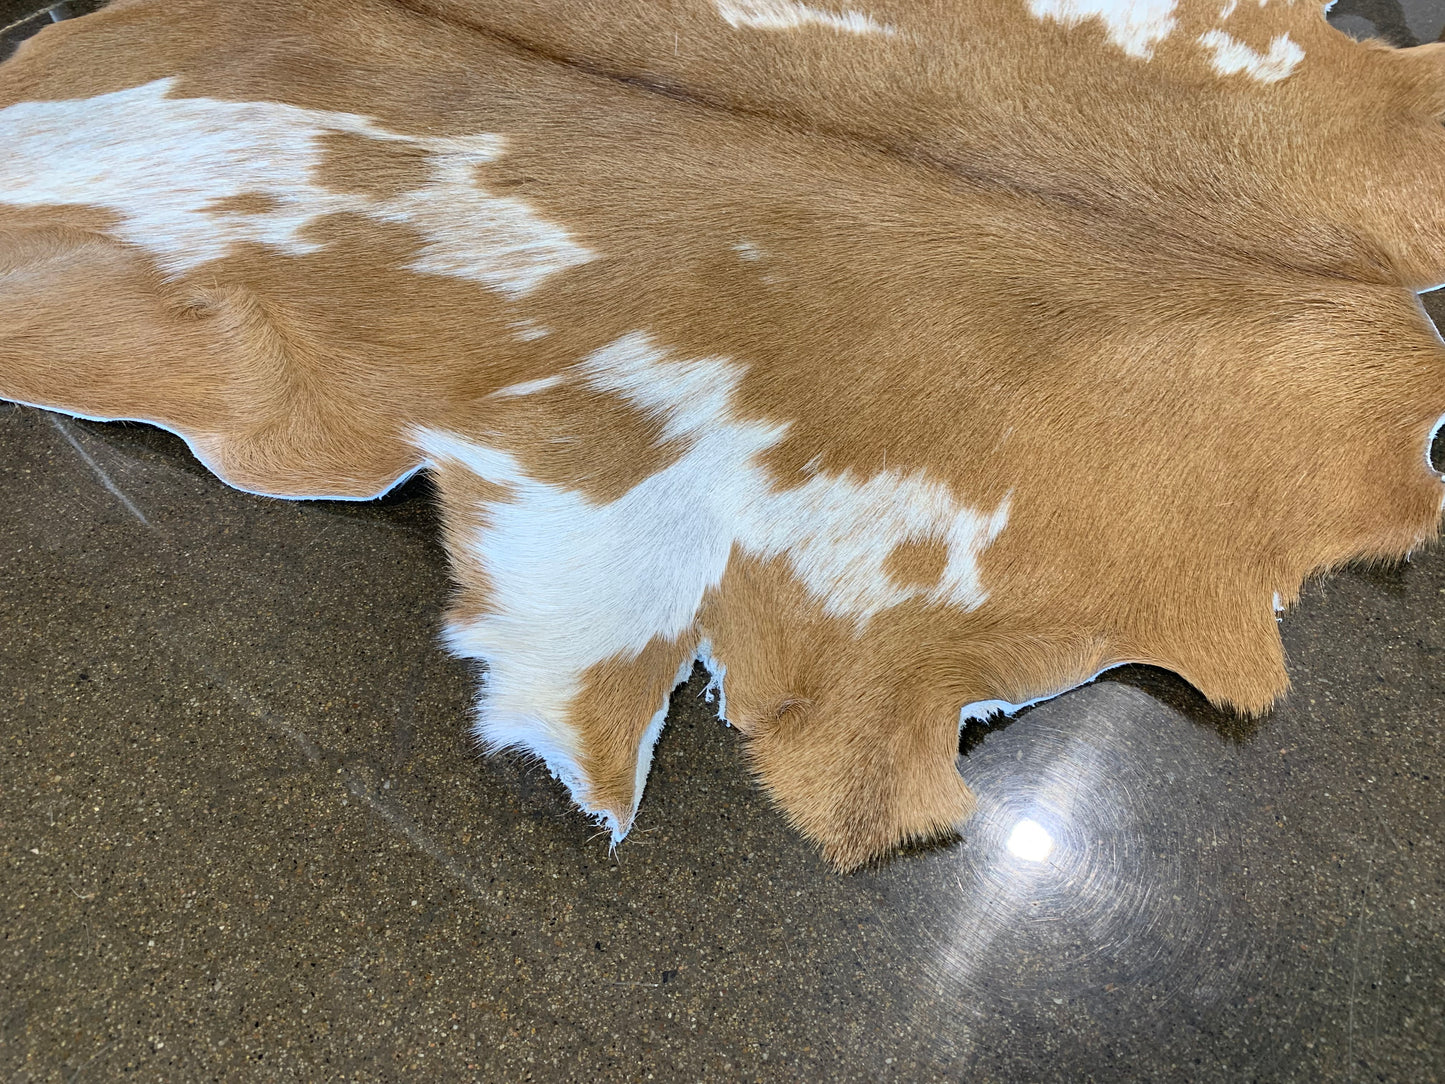 PC-2: Goat skin rug - Very small brown spotted